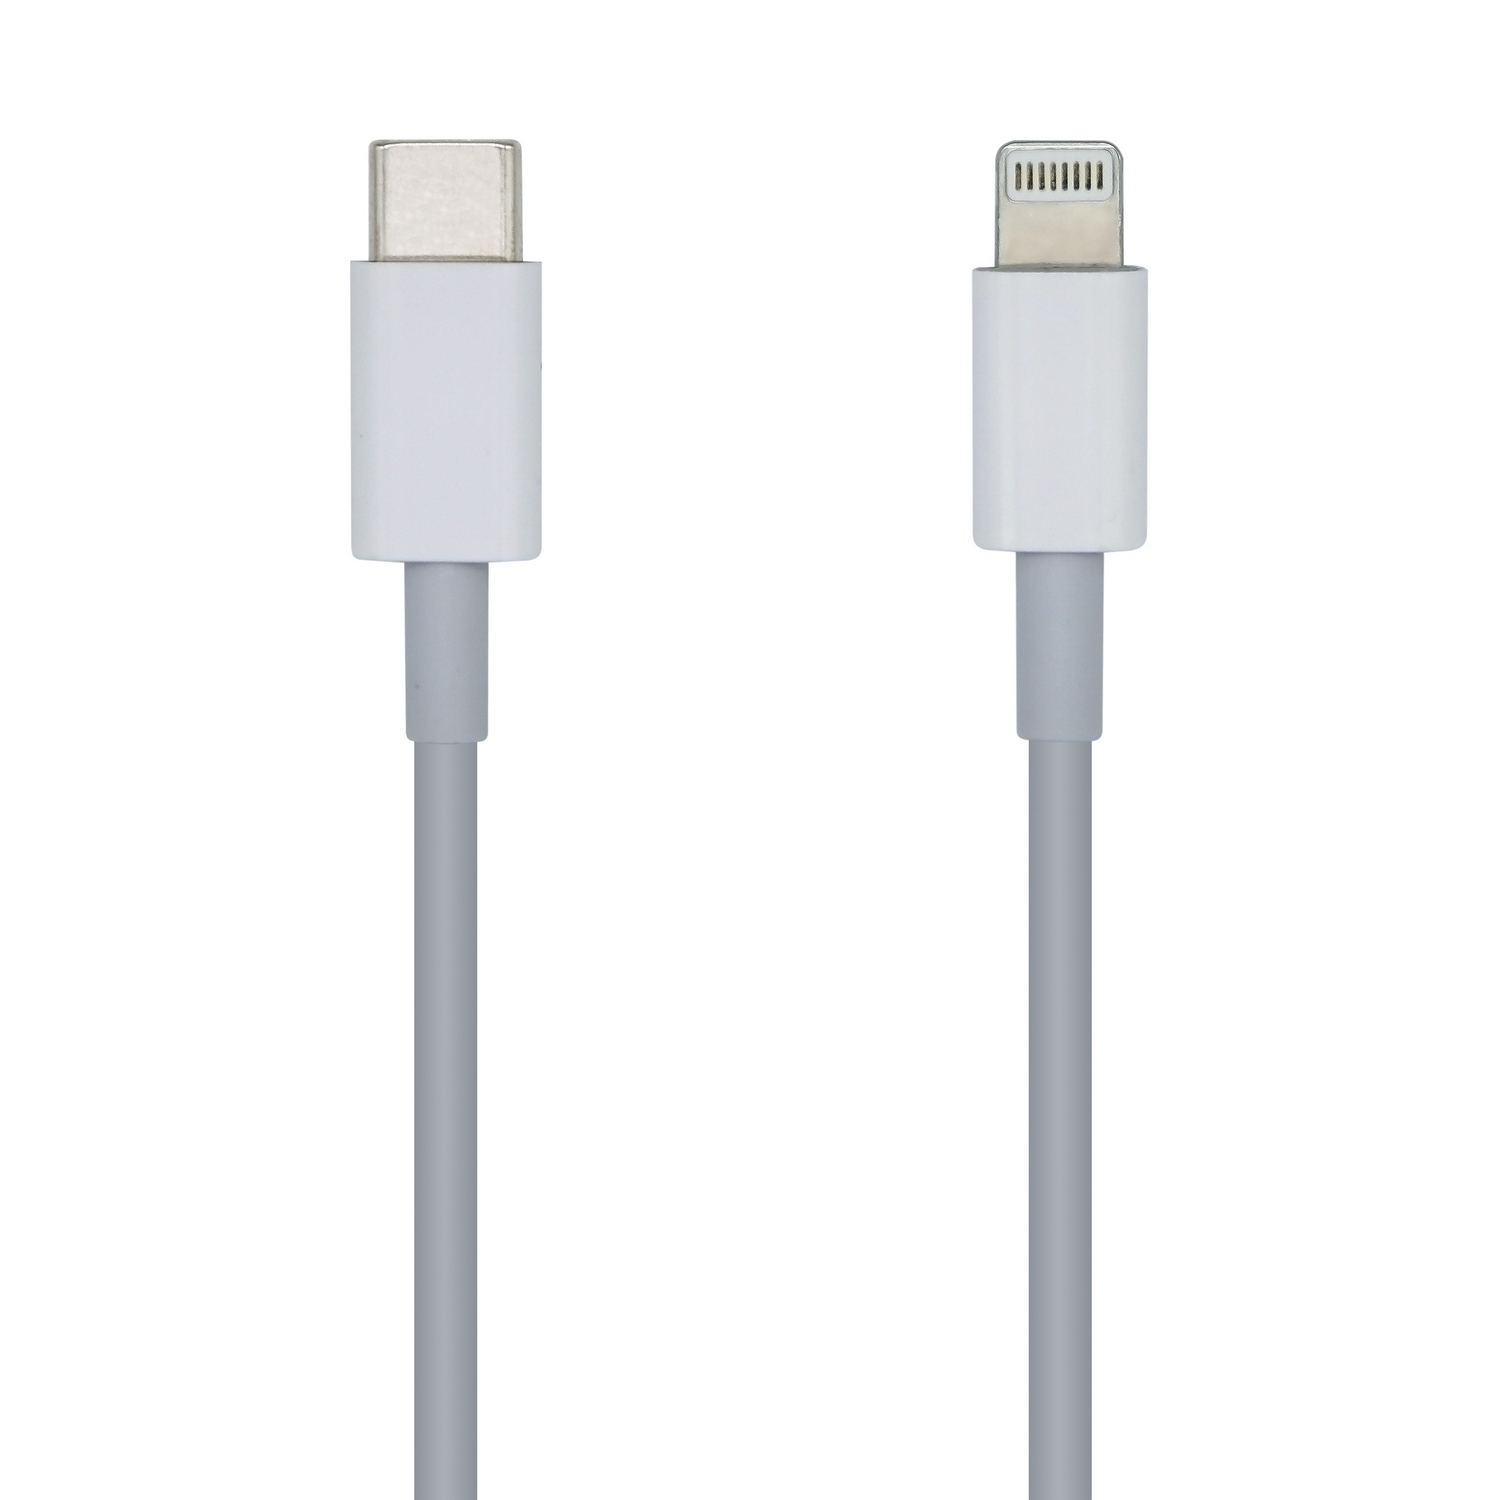 CABLE LIGHTNING AISENS A102-0443/ LIGHTNING MACHO - USB TIPO